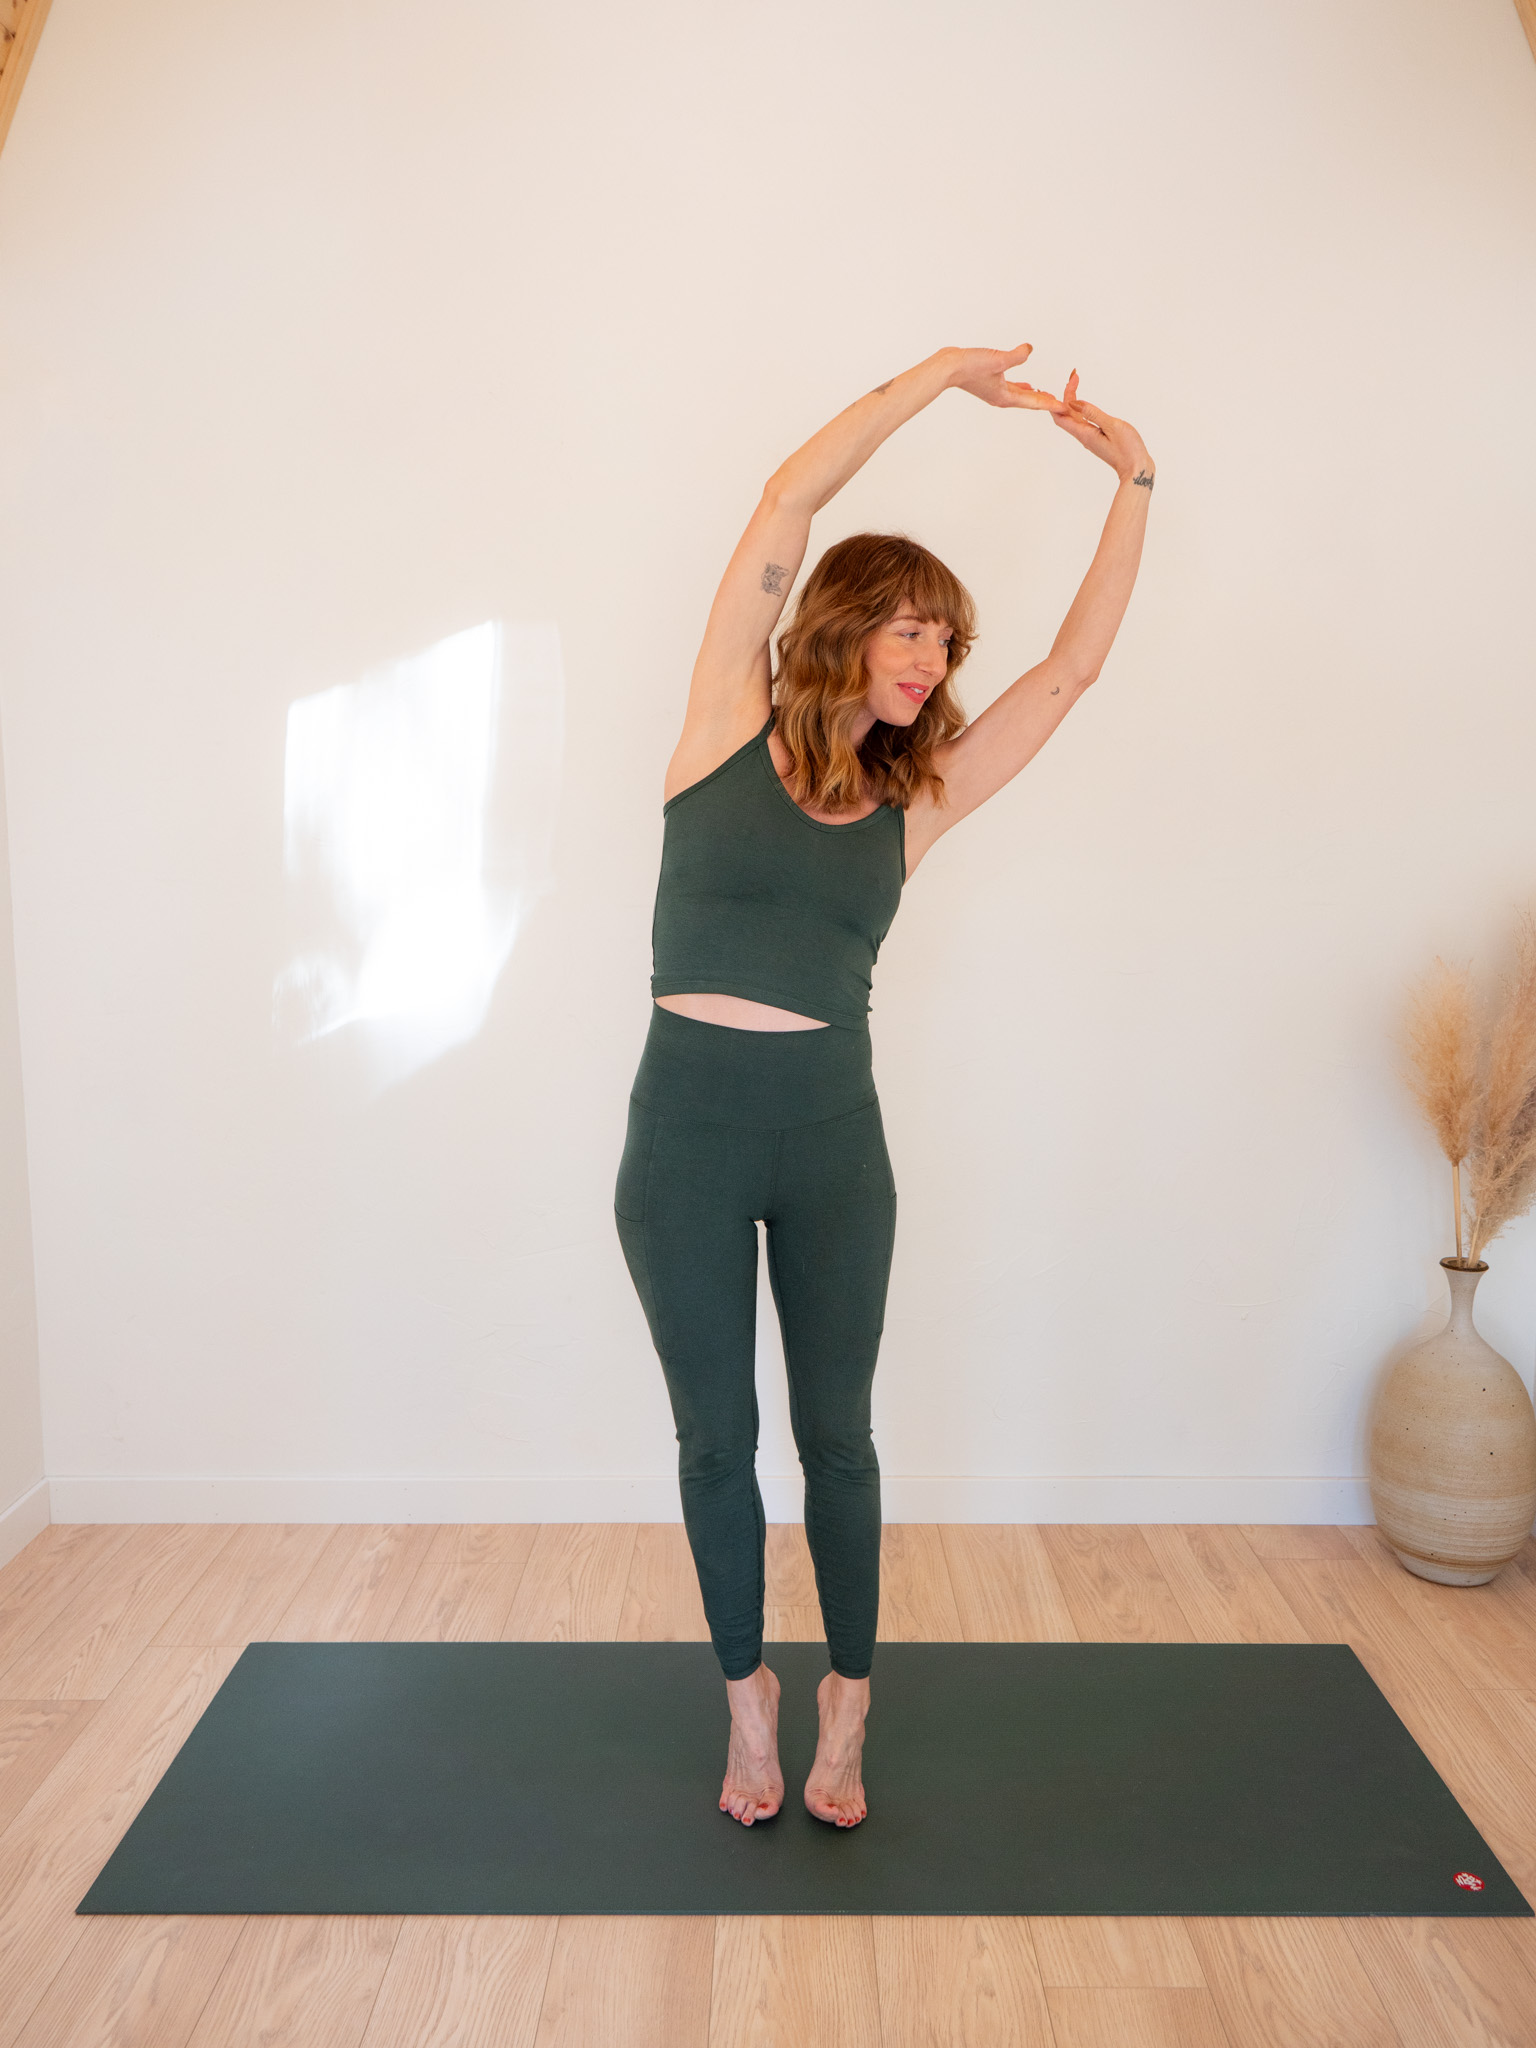 A woman in a green yoga outfit stretches her arms above her head, standing on a yoga mat in a bright, minimalist room.